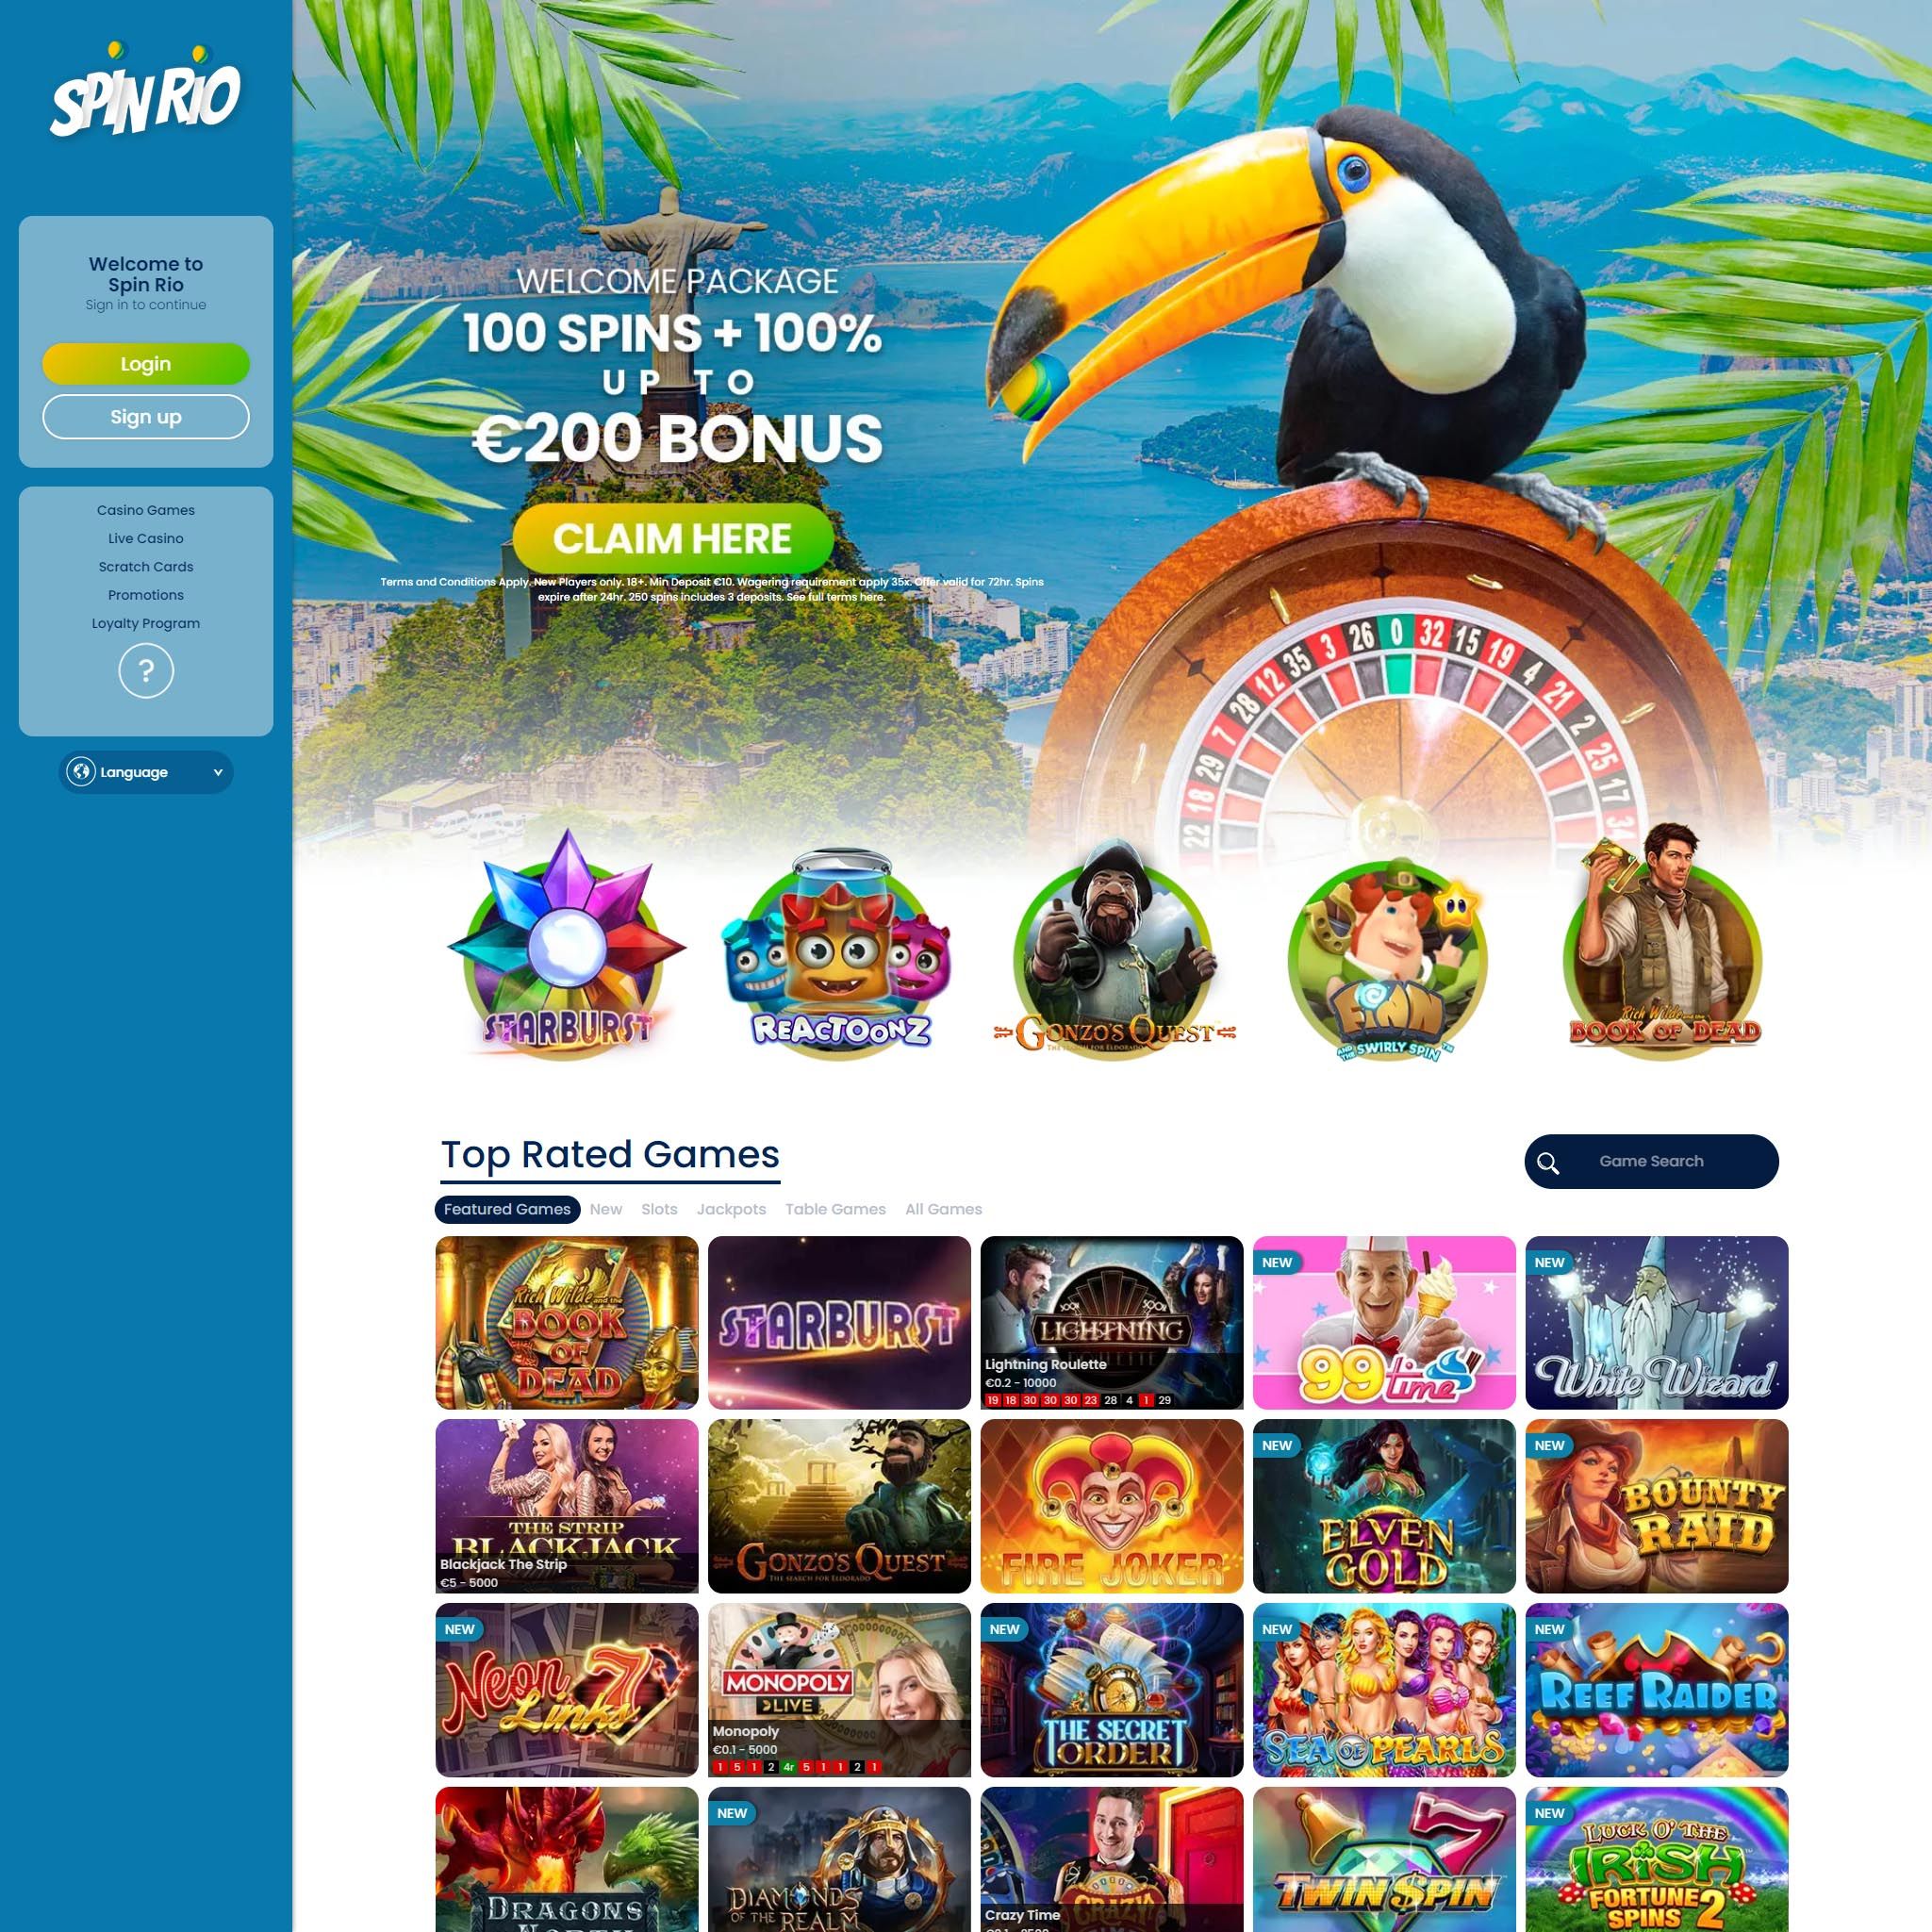 Spin Rio Casino review by Mr. Gamble